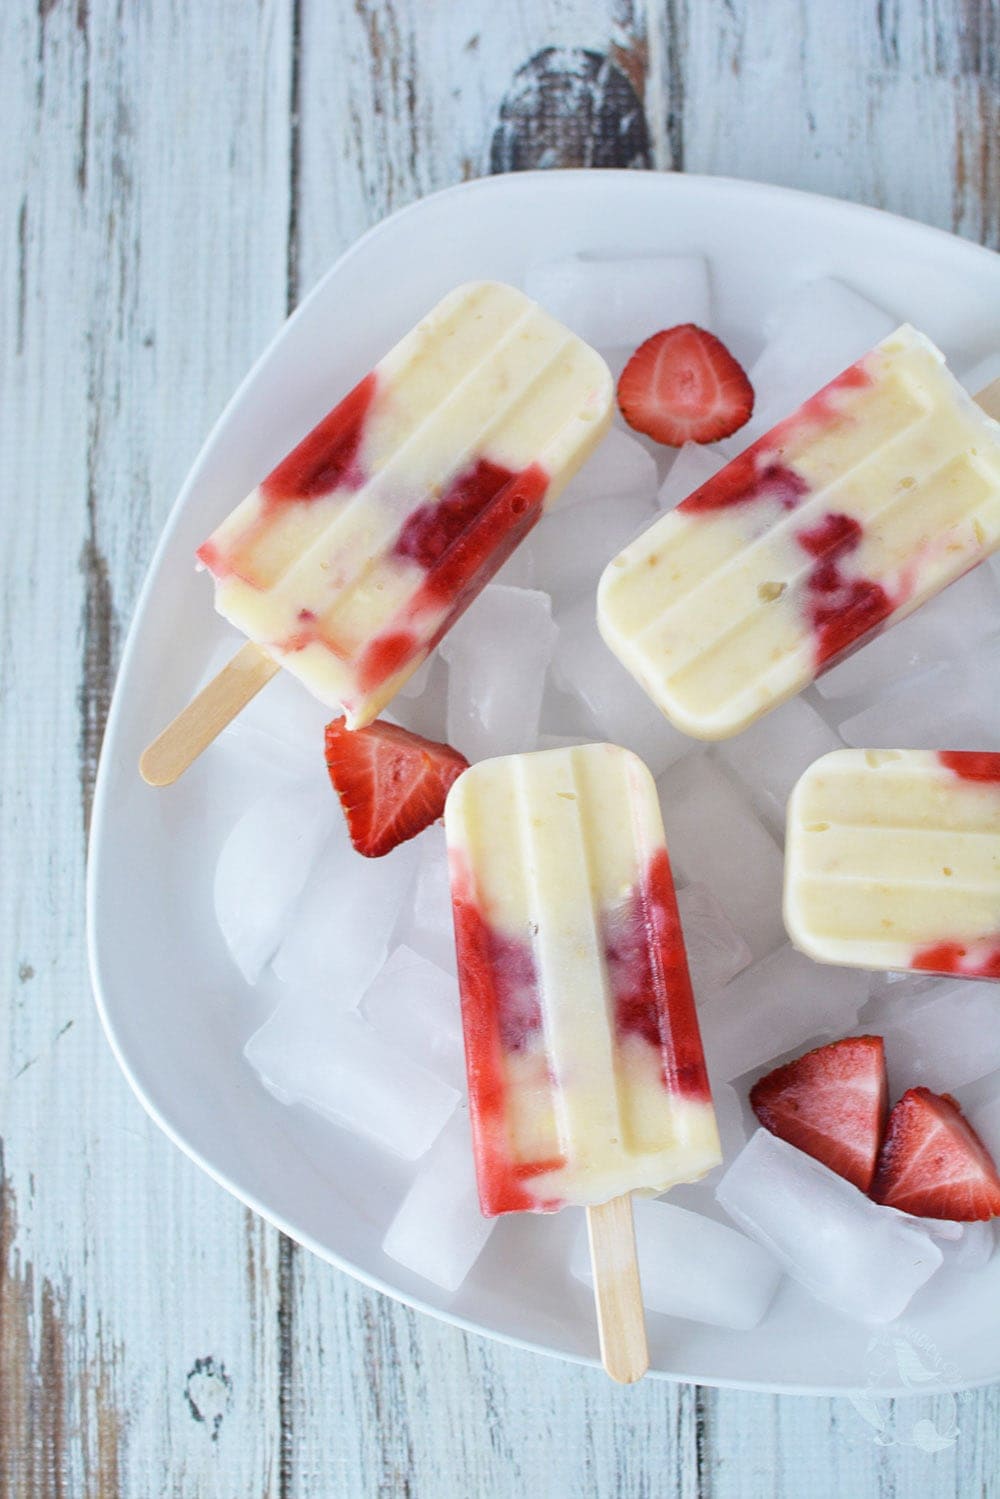 Cheesecake Popsicle with strawberries inside them on a white plate with ice.